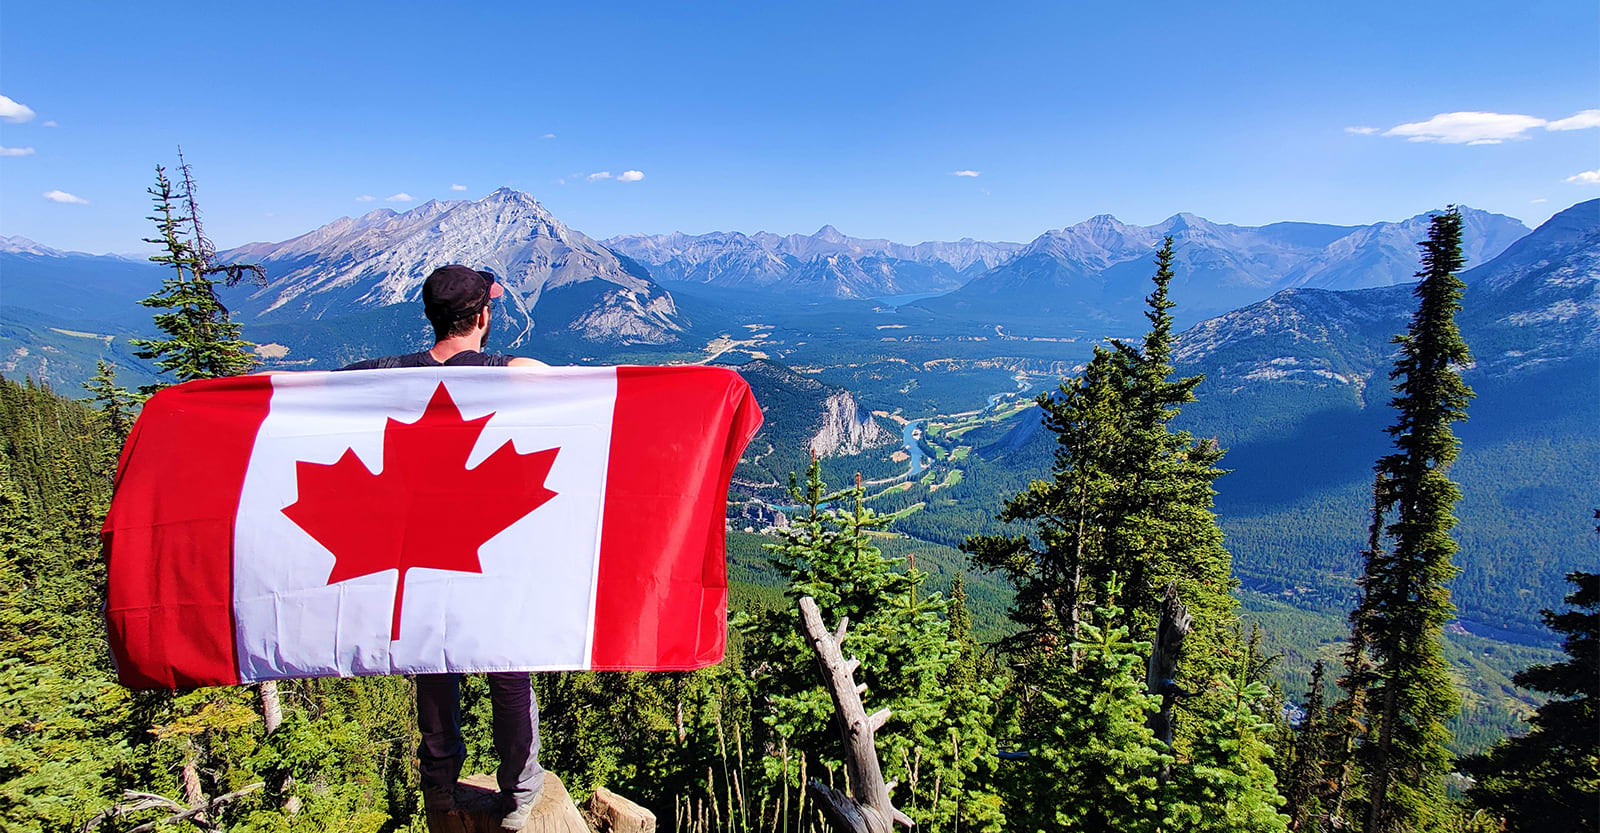  Canada ranks as the 15th happiest country in the world